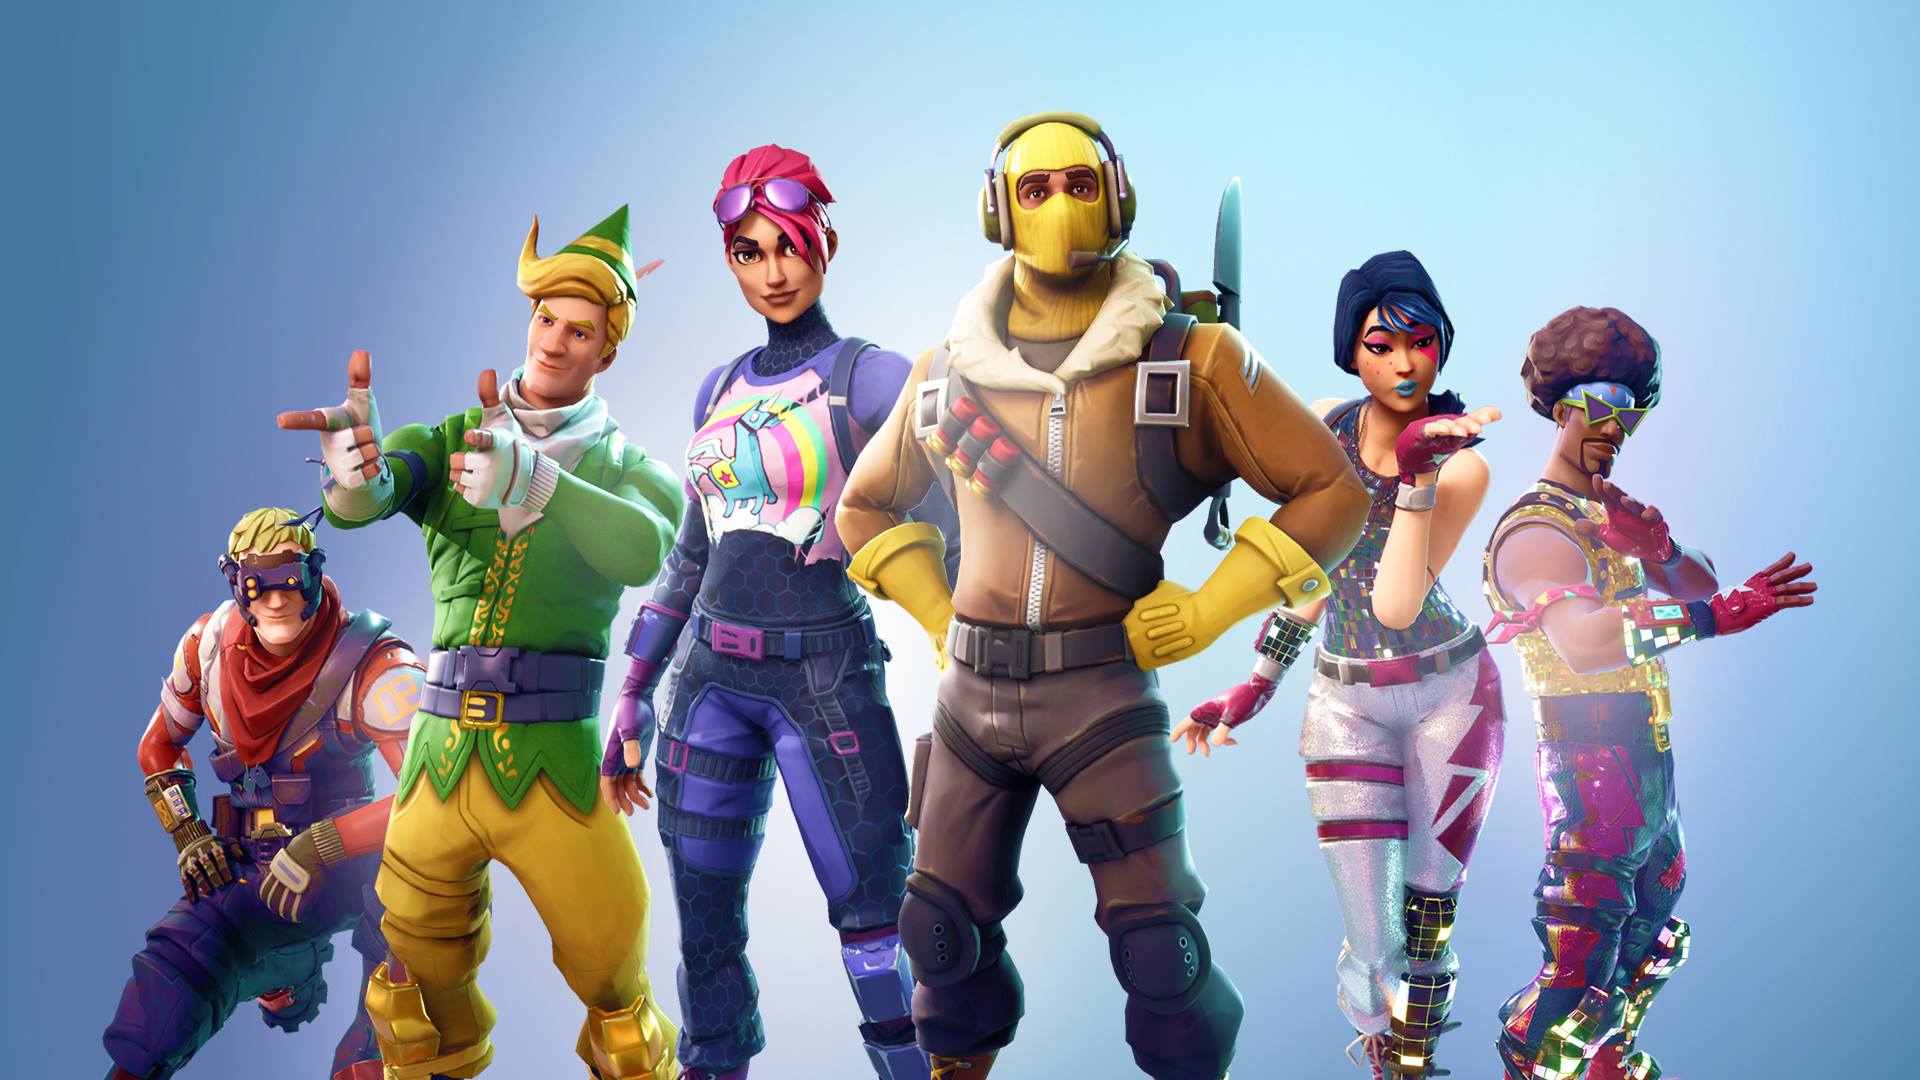 Fortnite Images - Pivotal Gamers